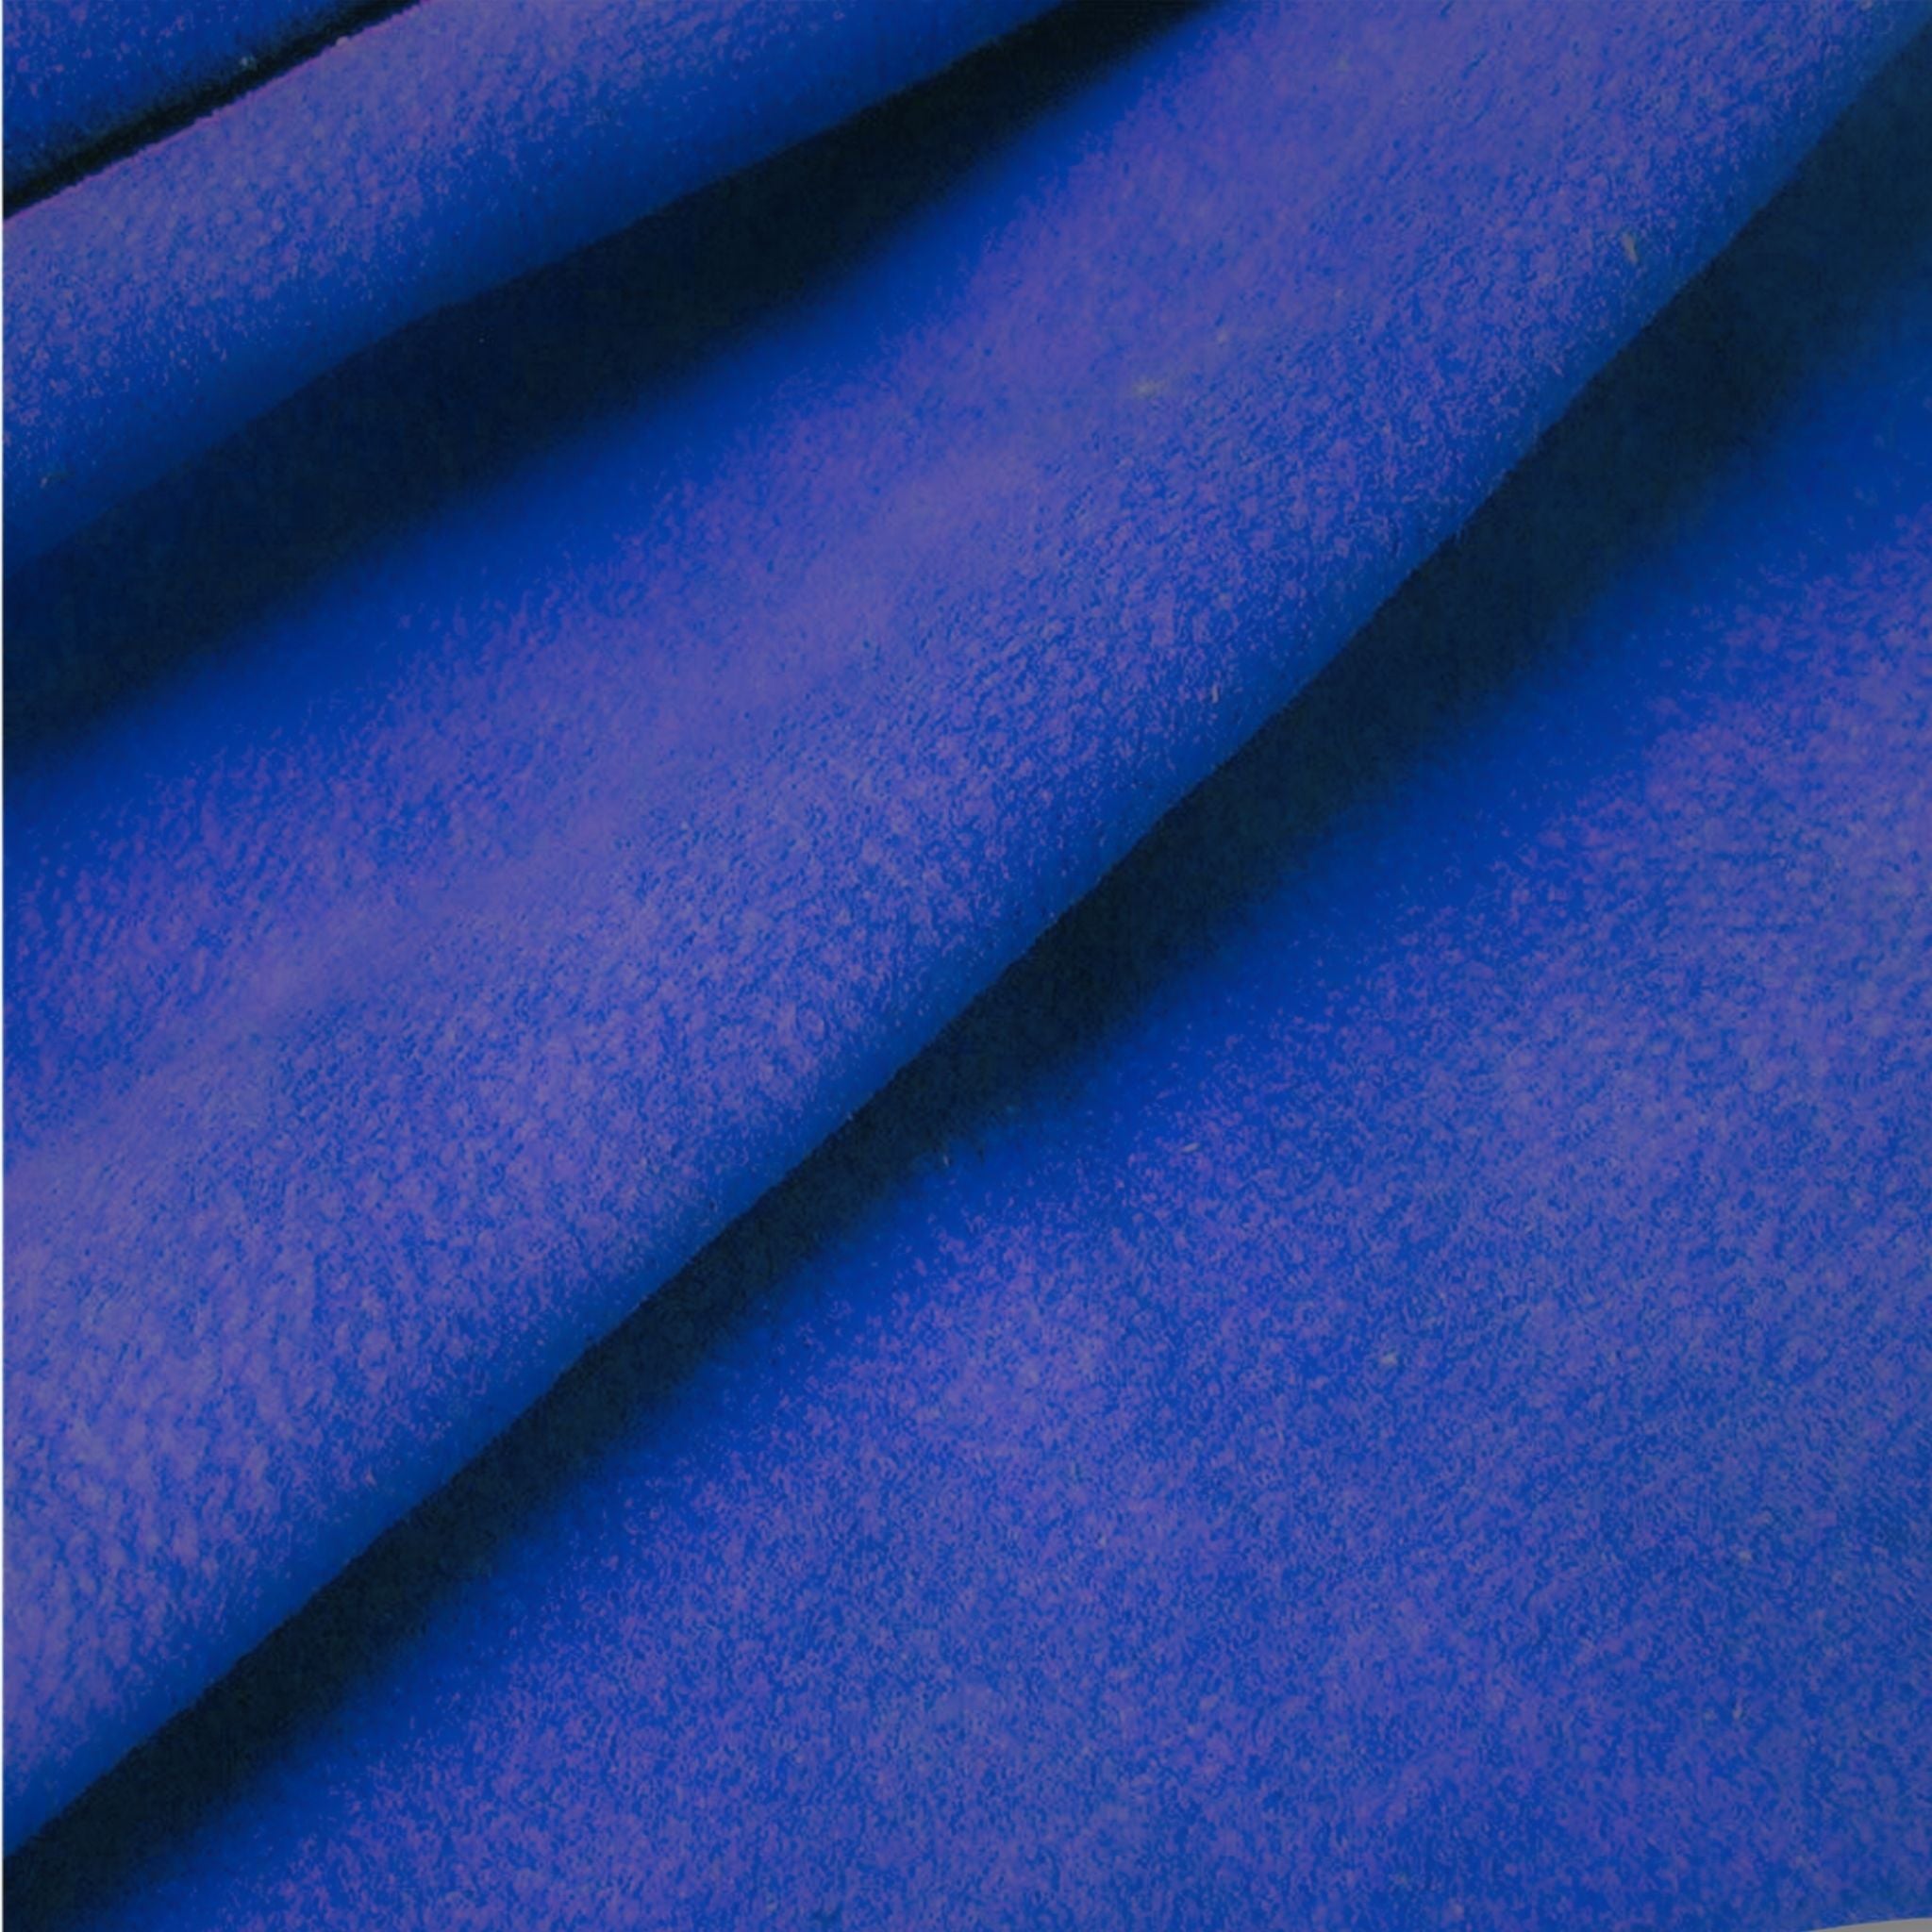 Striking electric blue soft suede ideal for cushions, dress making, waistcoats, bag, belt and box linings